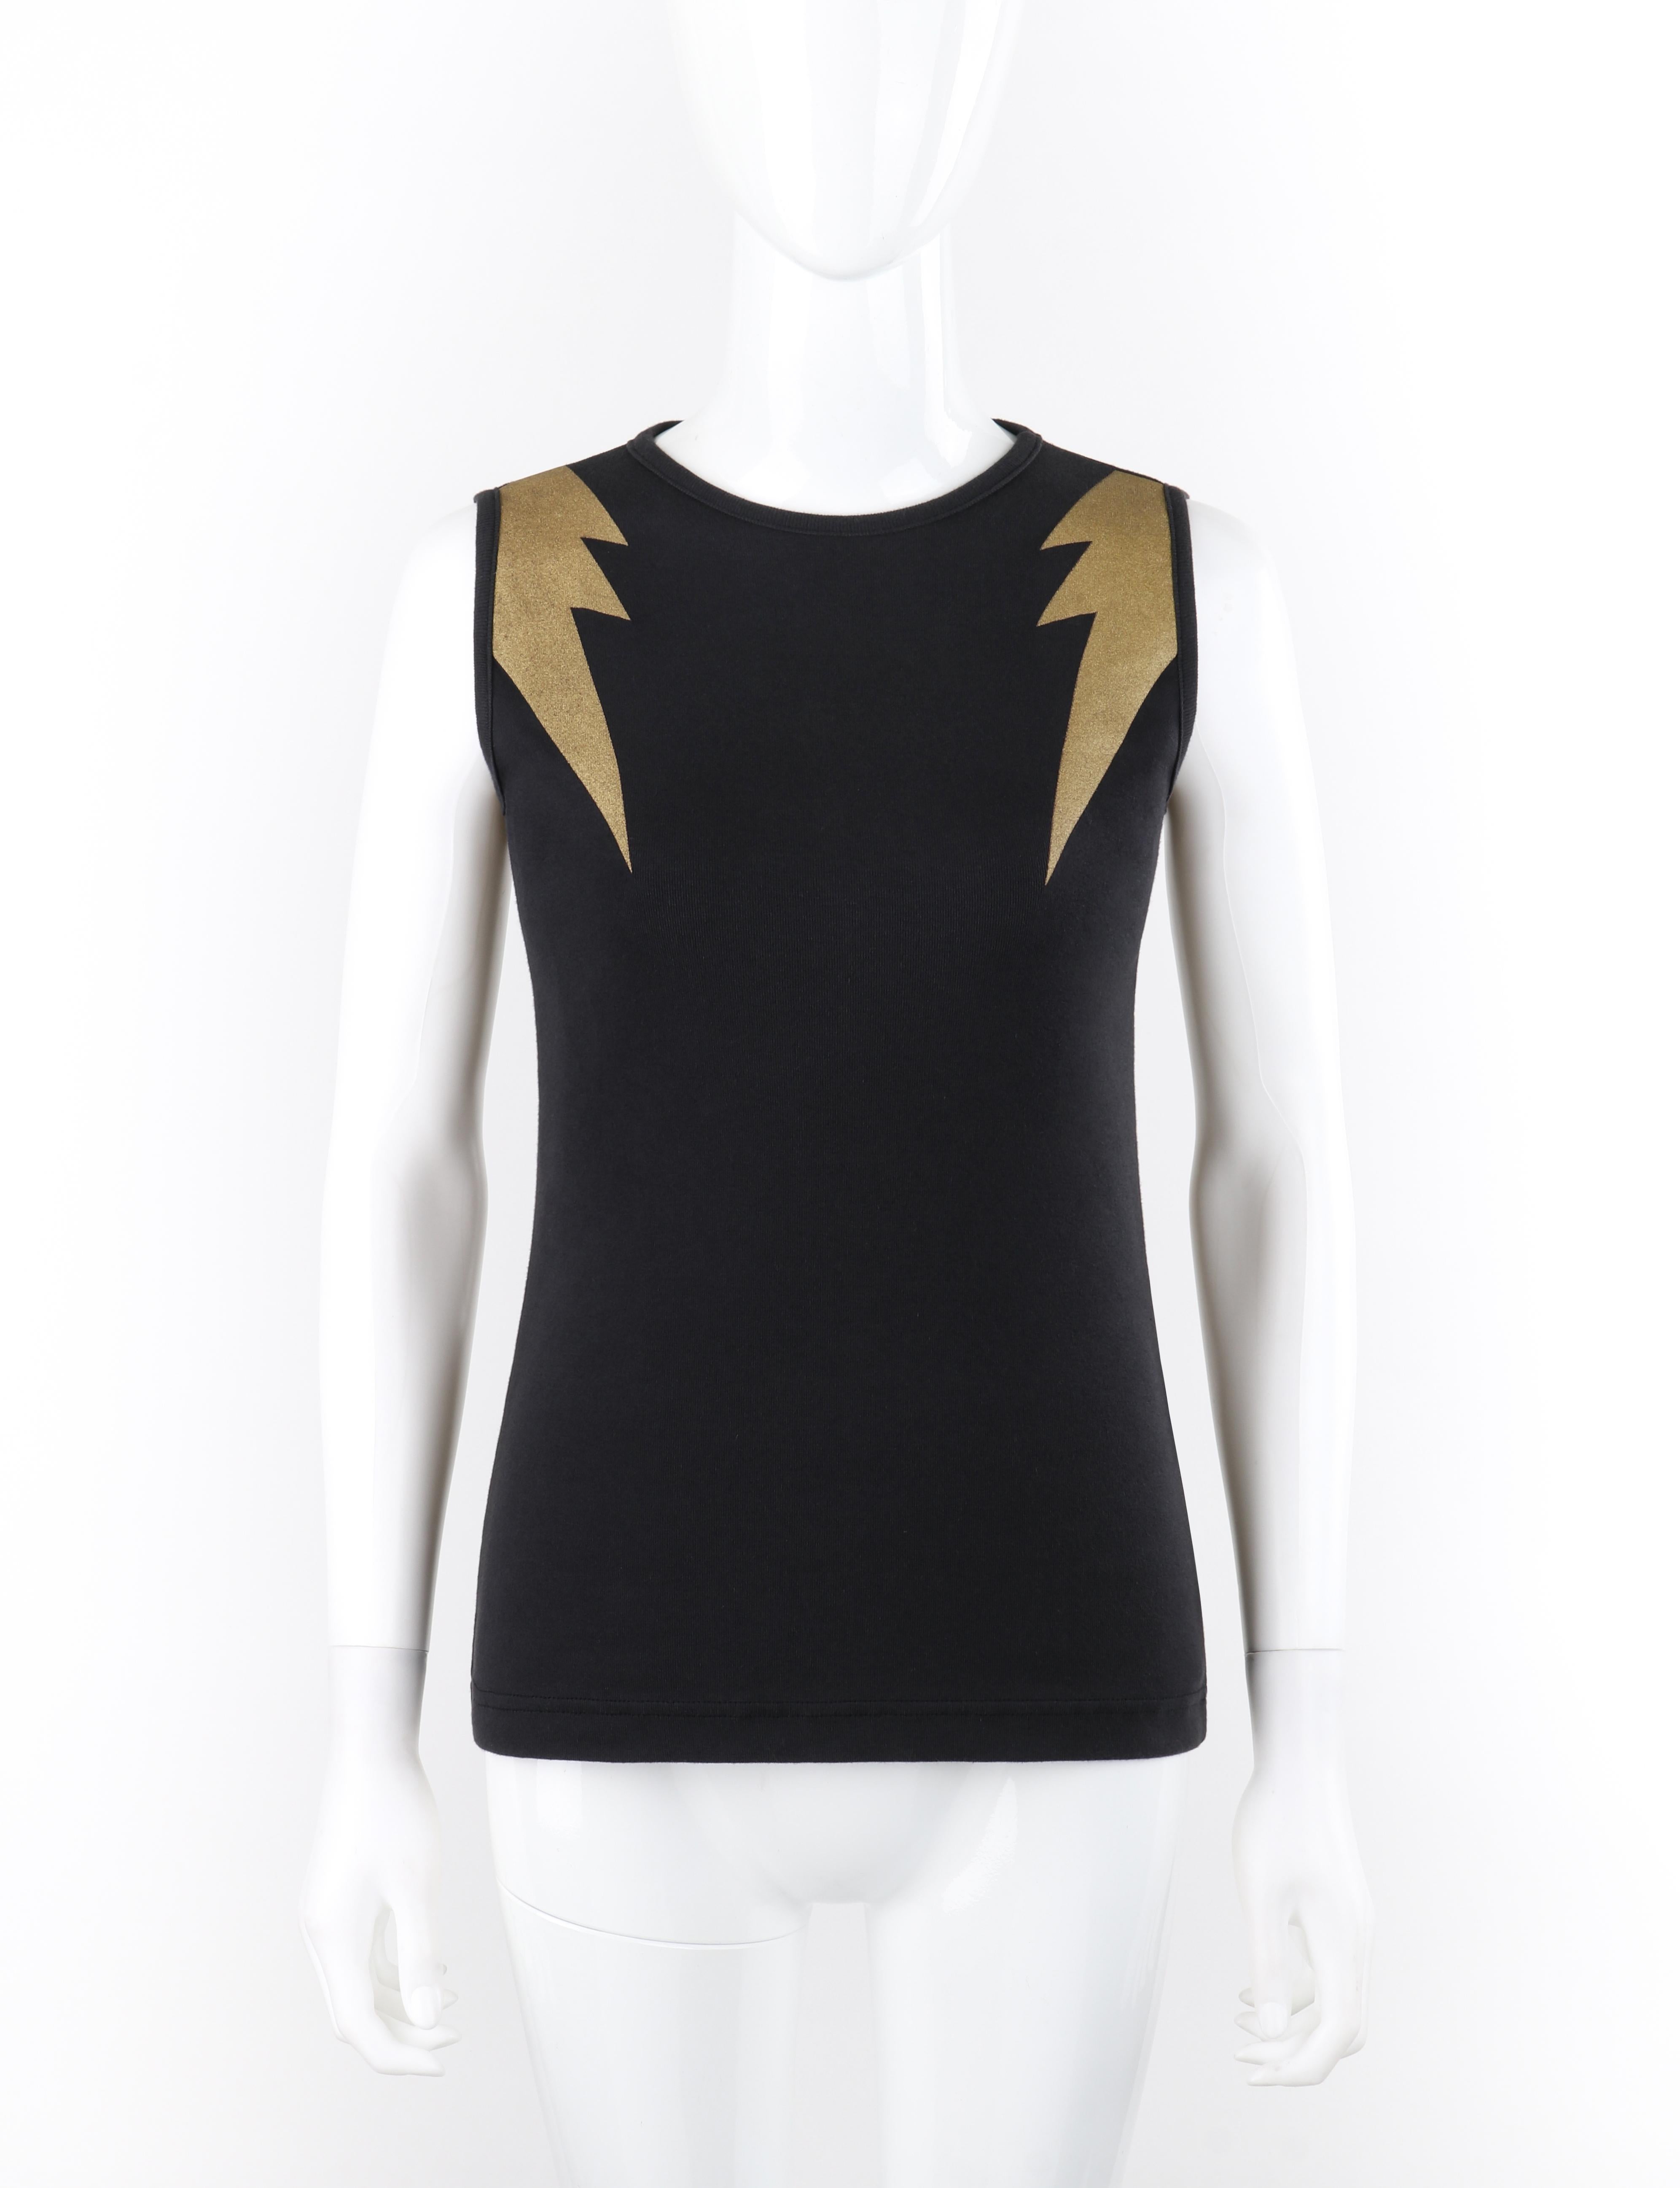 WALTER VAN BEIRENDONCK c.2010's Black Gold Metallic Lightning Bolt Tank Top NWT

Brand / Manufacturer: Walter Van Beirendonck for Wild & Lethal Trash
Circa: 2010's 
Style: Tank Top
Color(s): Shades of black, gold
Lined: No 
Marked Fabric Content: